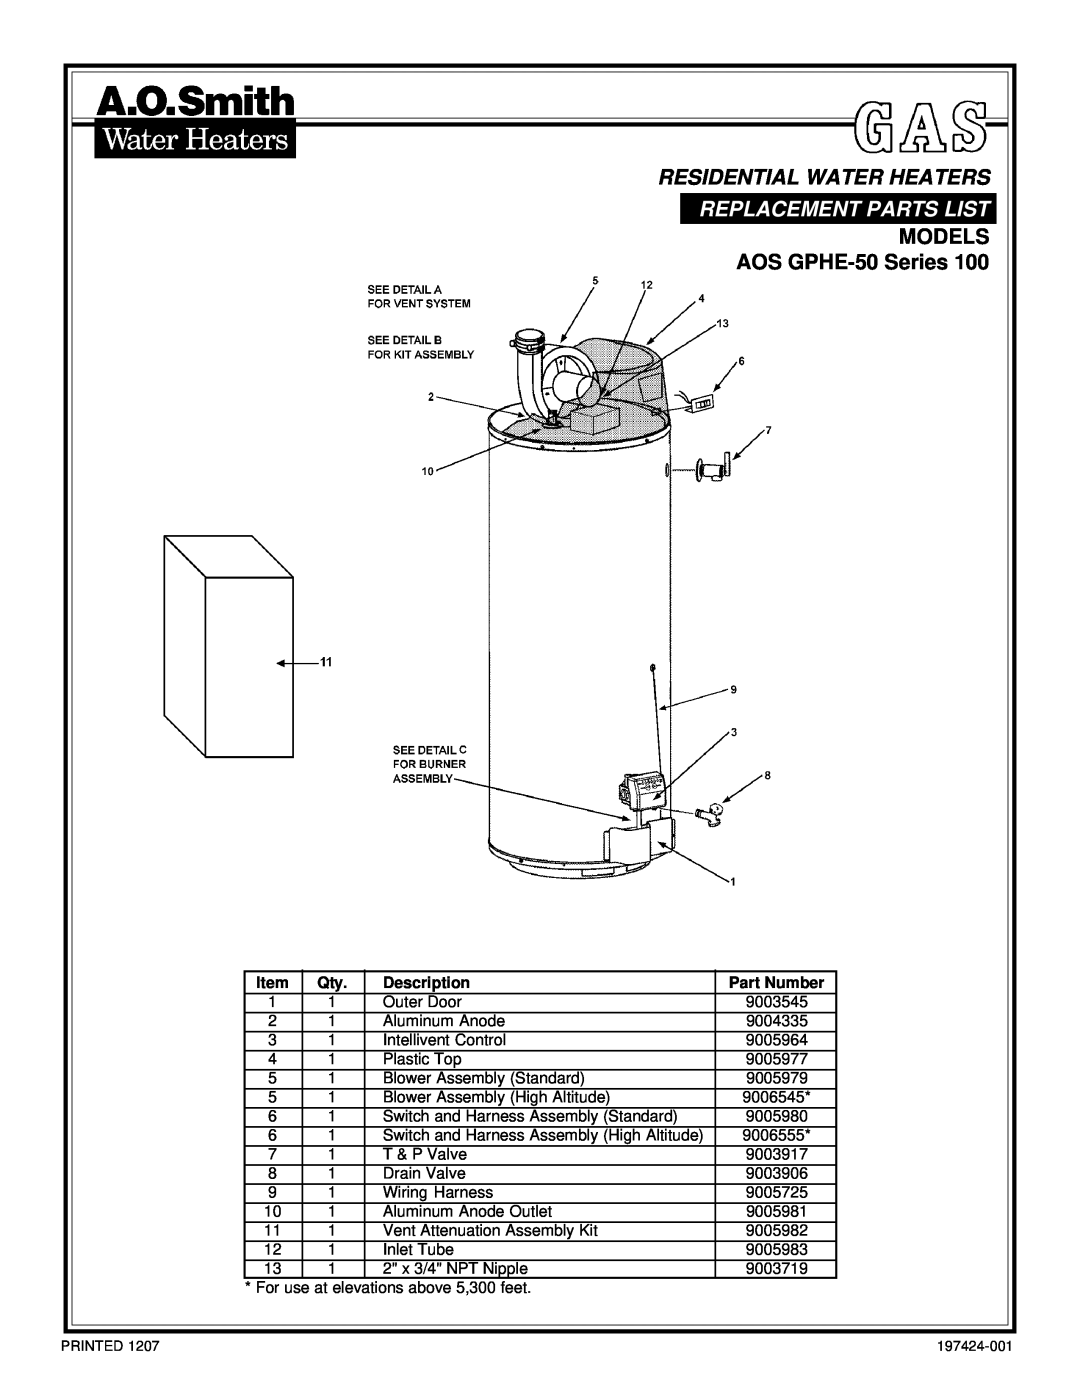 A.O. Smith manual MODELS AOS GPHE-50 Series, Description, Part Number, Residential Water Heaters 